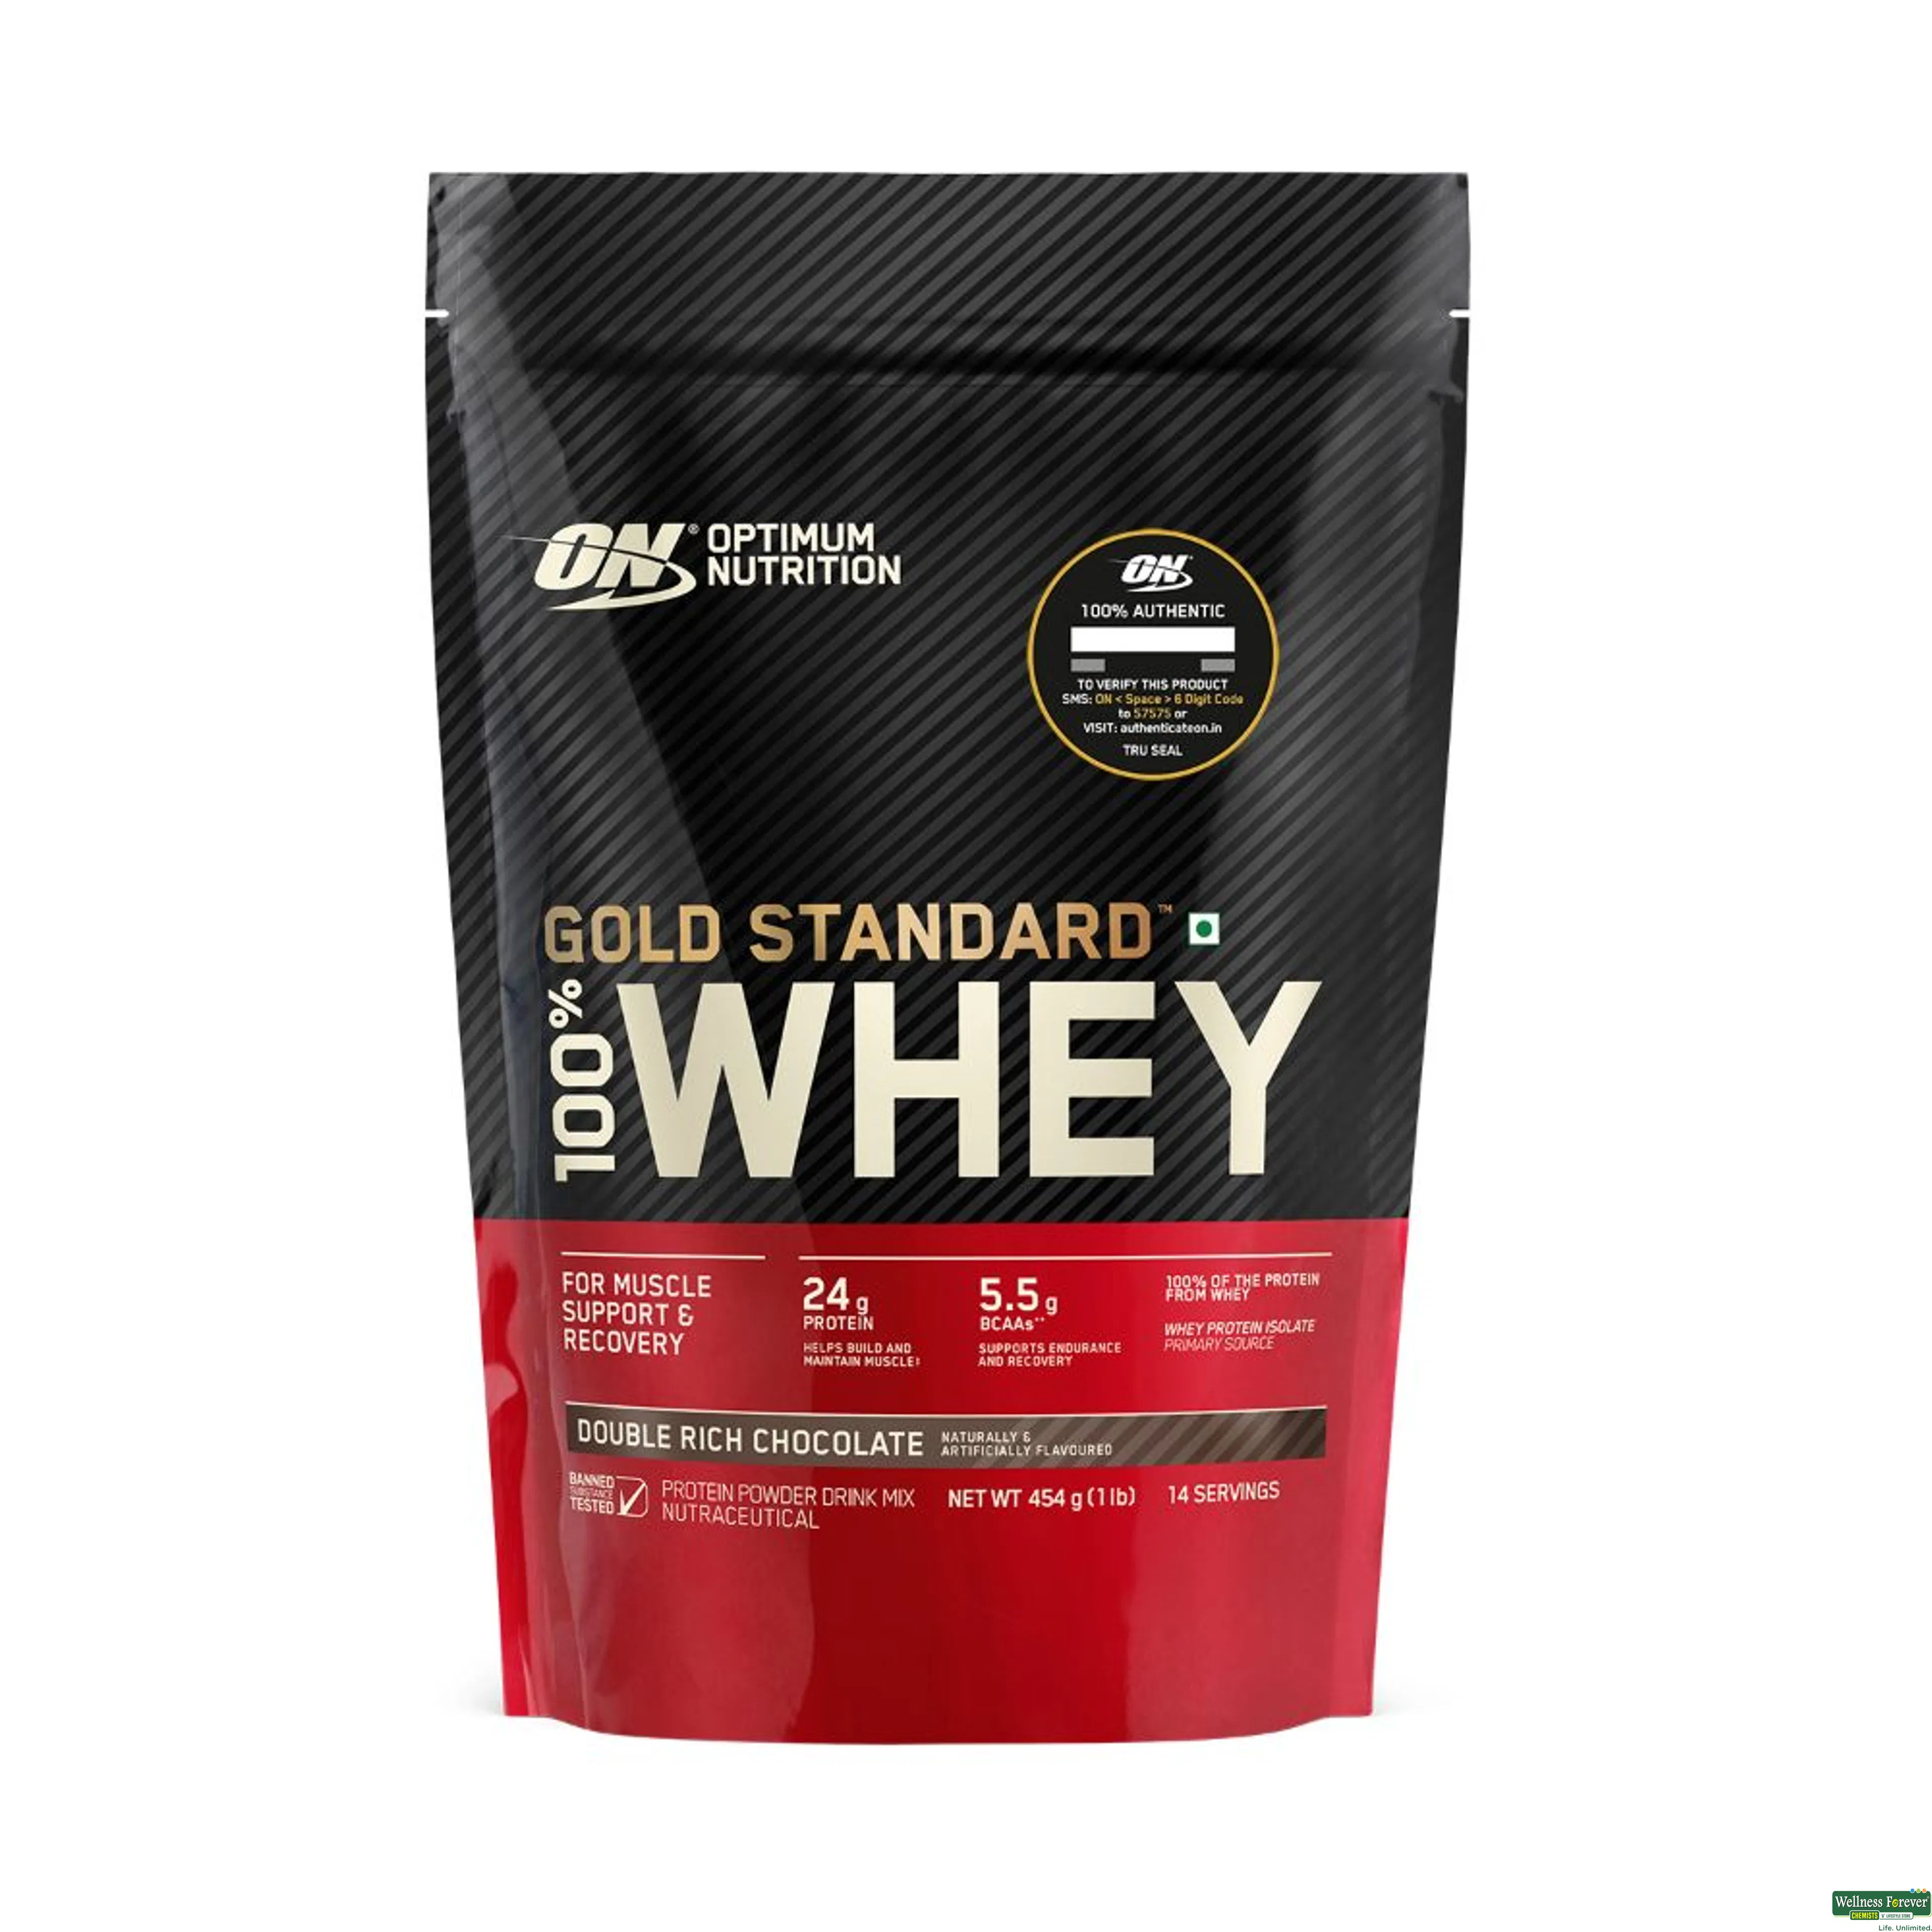 ON WHEY GOLD STANDARD 100% D R CHOC 1LBS-image